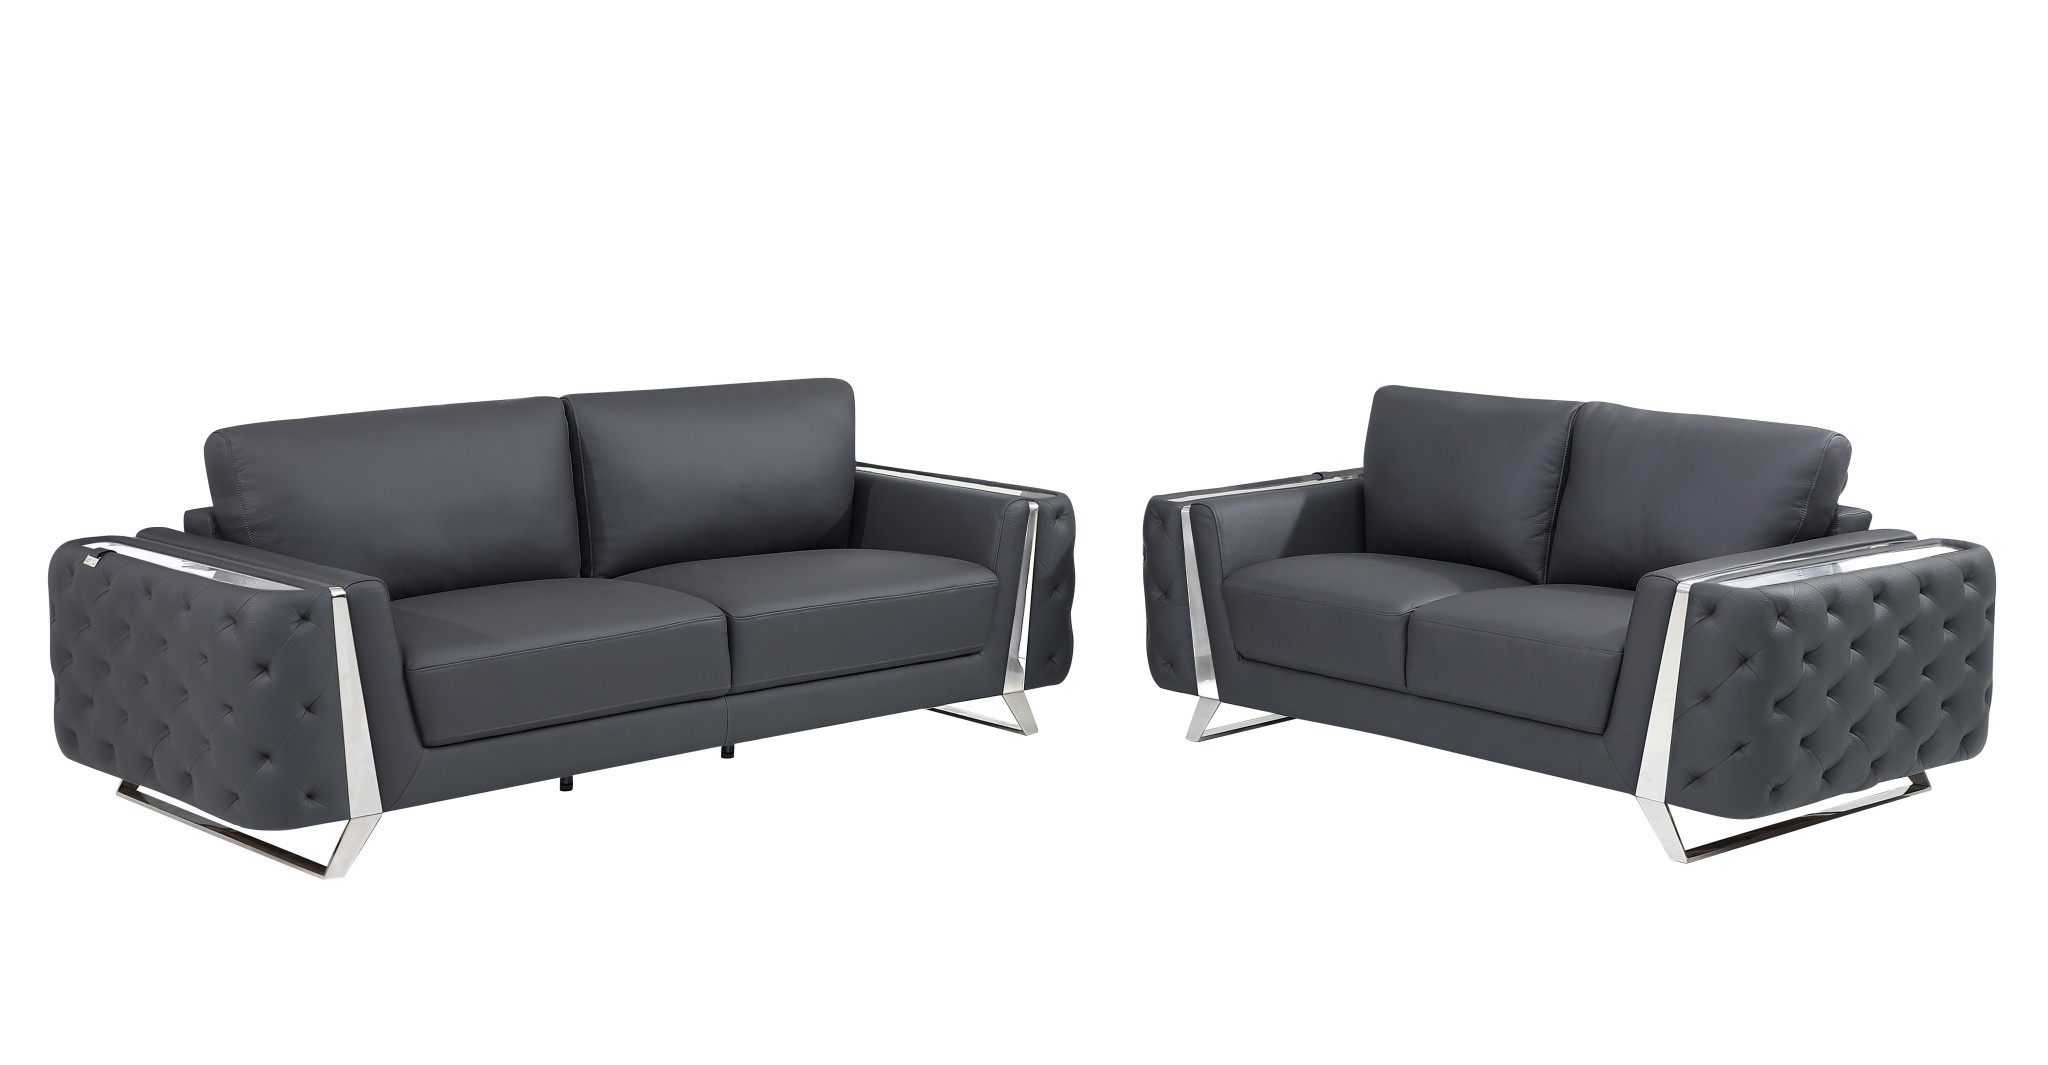 Two Piece Indoor Dark Gray Italian Leather Five Person Seating Set-518559-1